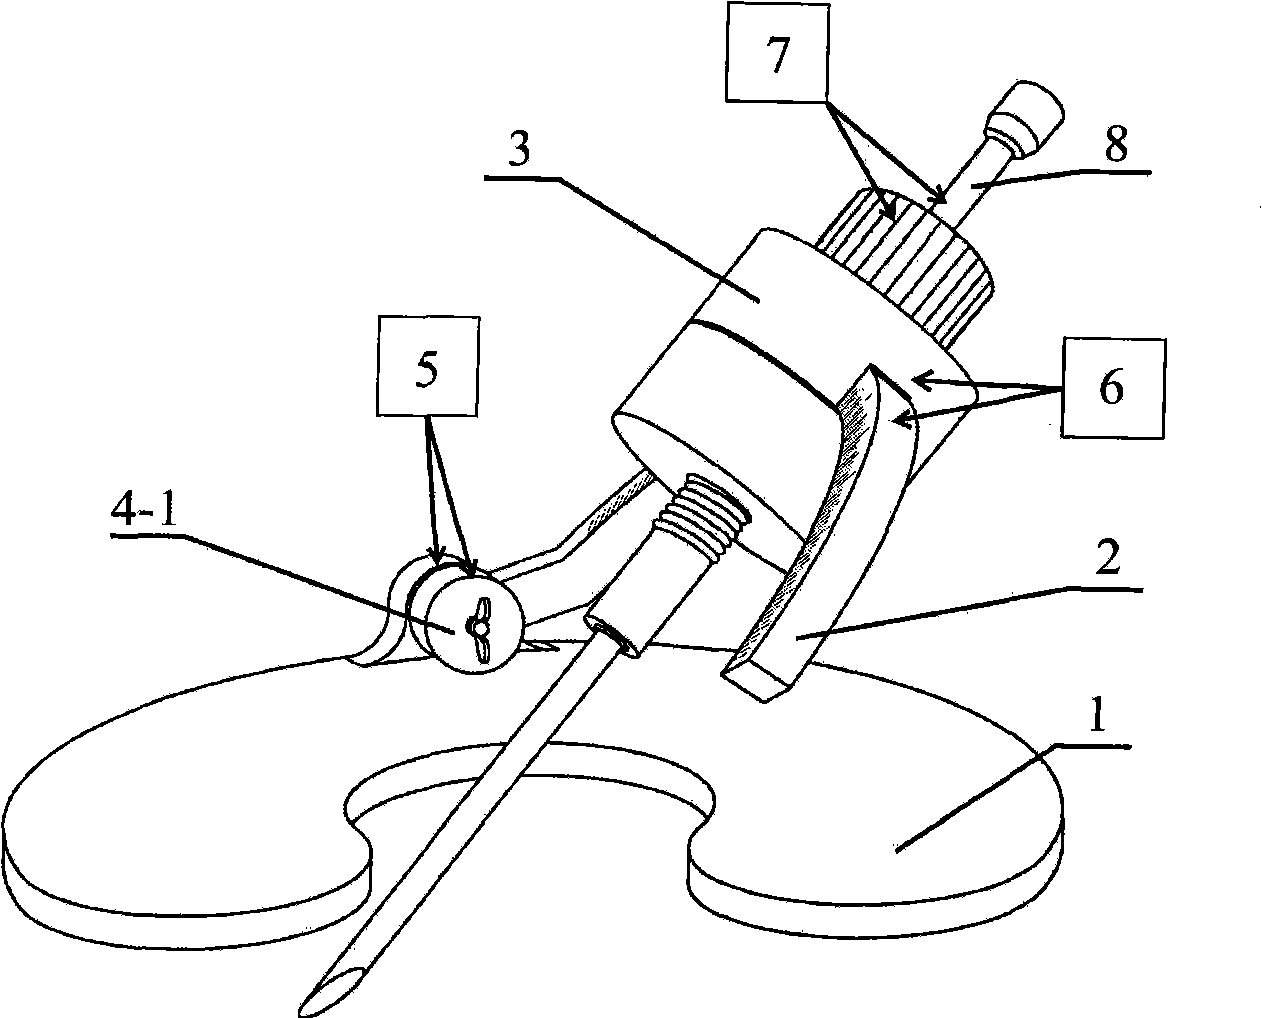 Stereotaxic apparatus capable of guiding in real time